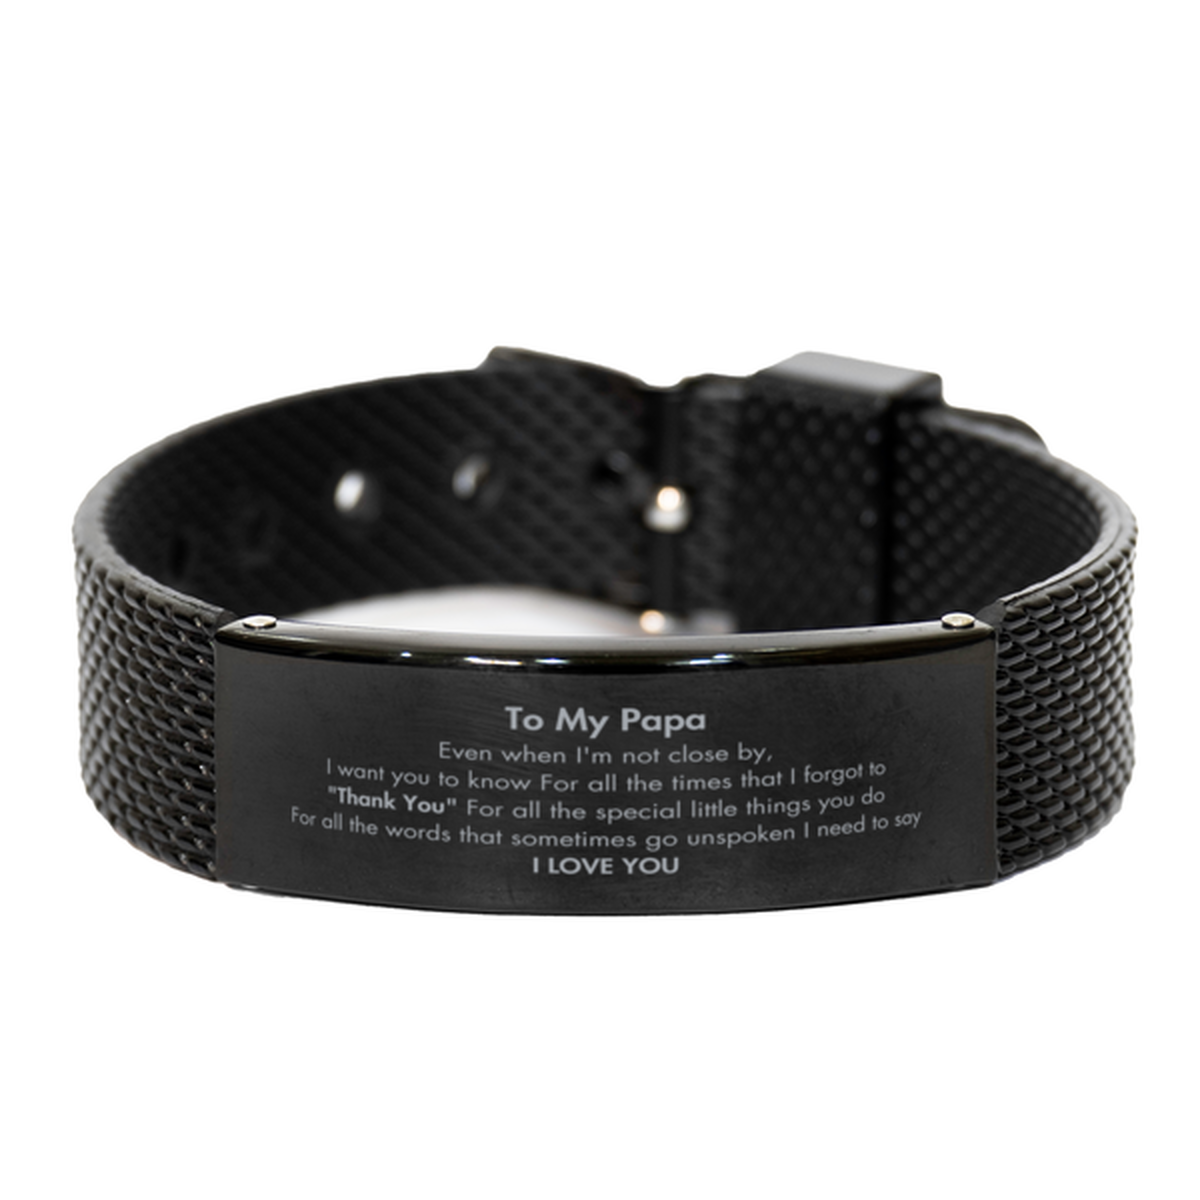 Thank You Gifts for Papa, Keepsake Black Shark Mesh Bracelet Gifts for Papa Birthday Mother's day Father's Day Papa For all the words That sometimes go unspoken I need to say I LOVE YOU